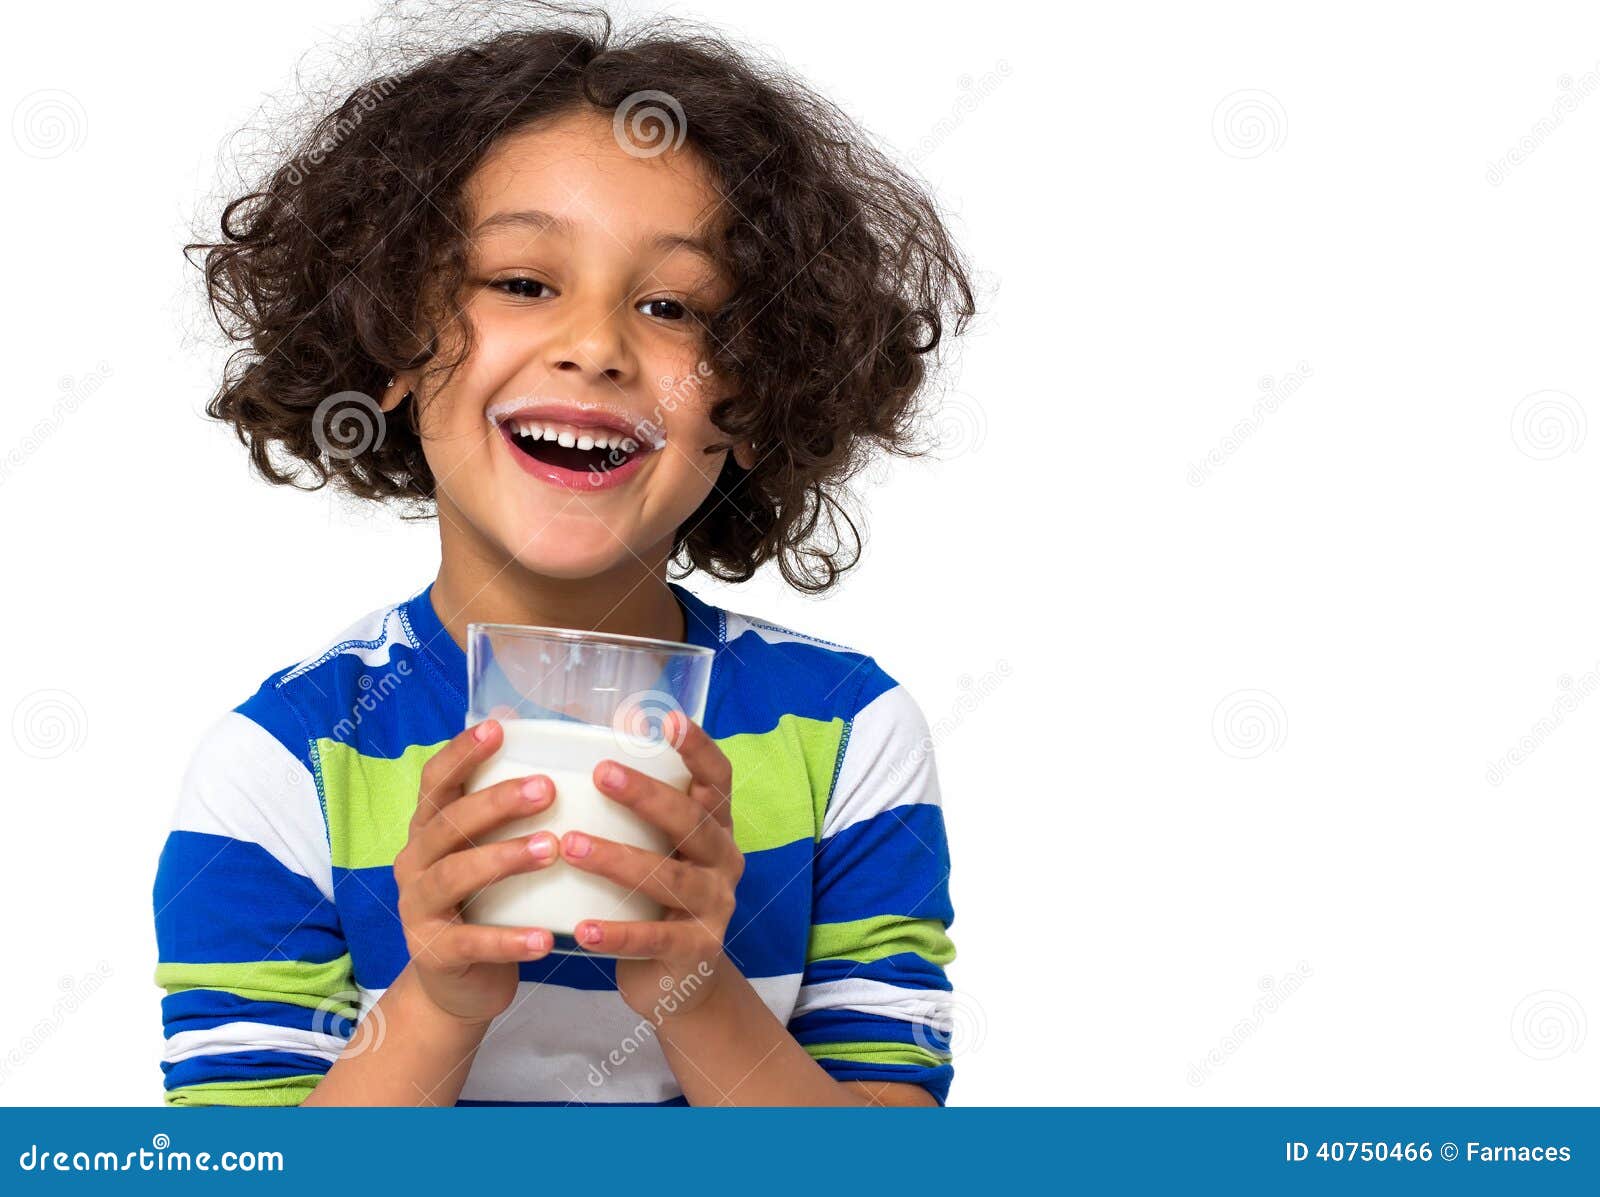 Little Girl Drinking a Glass of Milk Stock Photo - Image of beauty ...